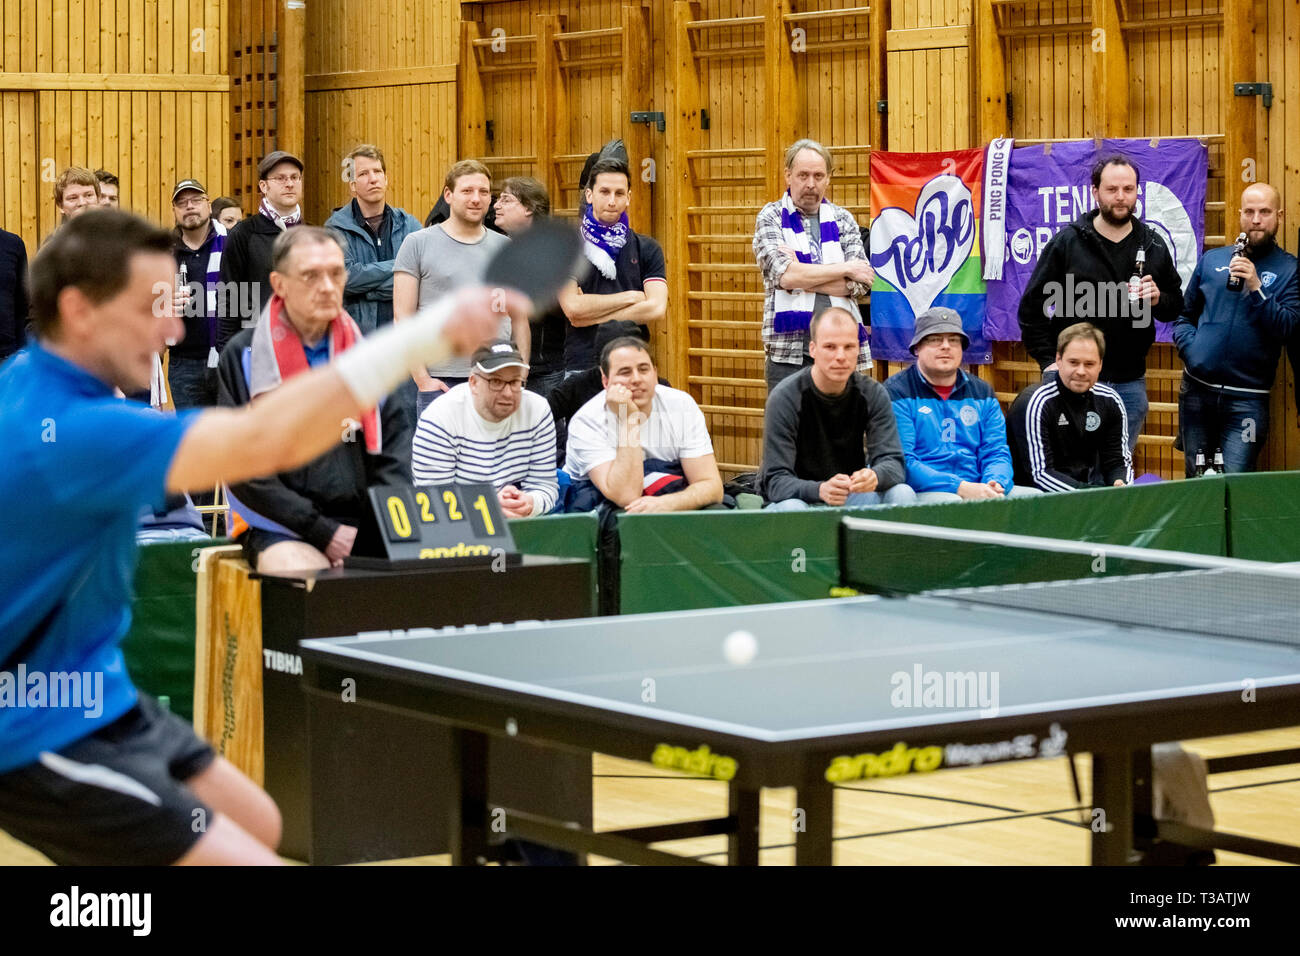 Berlin, Germany. 26th Mar, 2019. Soccer fans of Tennis Borussia Berlin  (TeBe) watch a table tennis game of the table tennis department of their  club against the Steglitzer Tischtennis Klub Berlin (STTK)